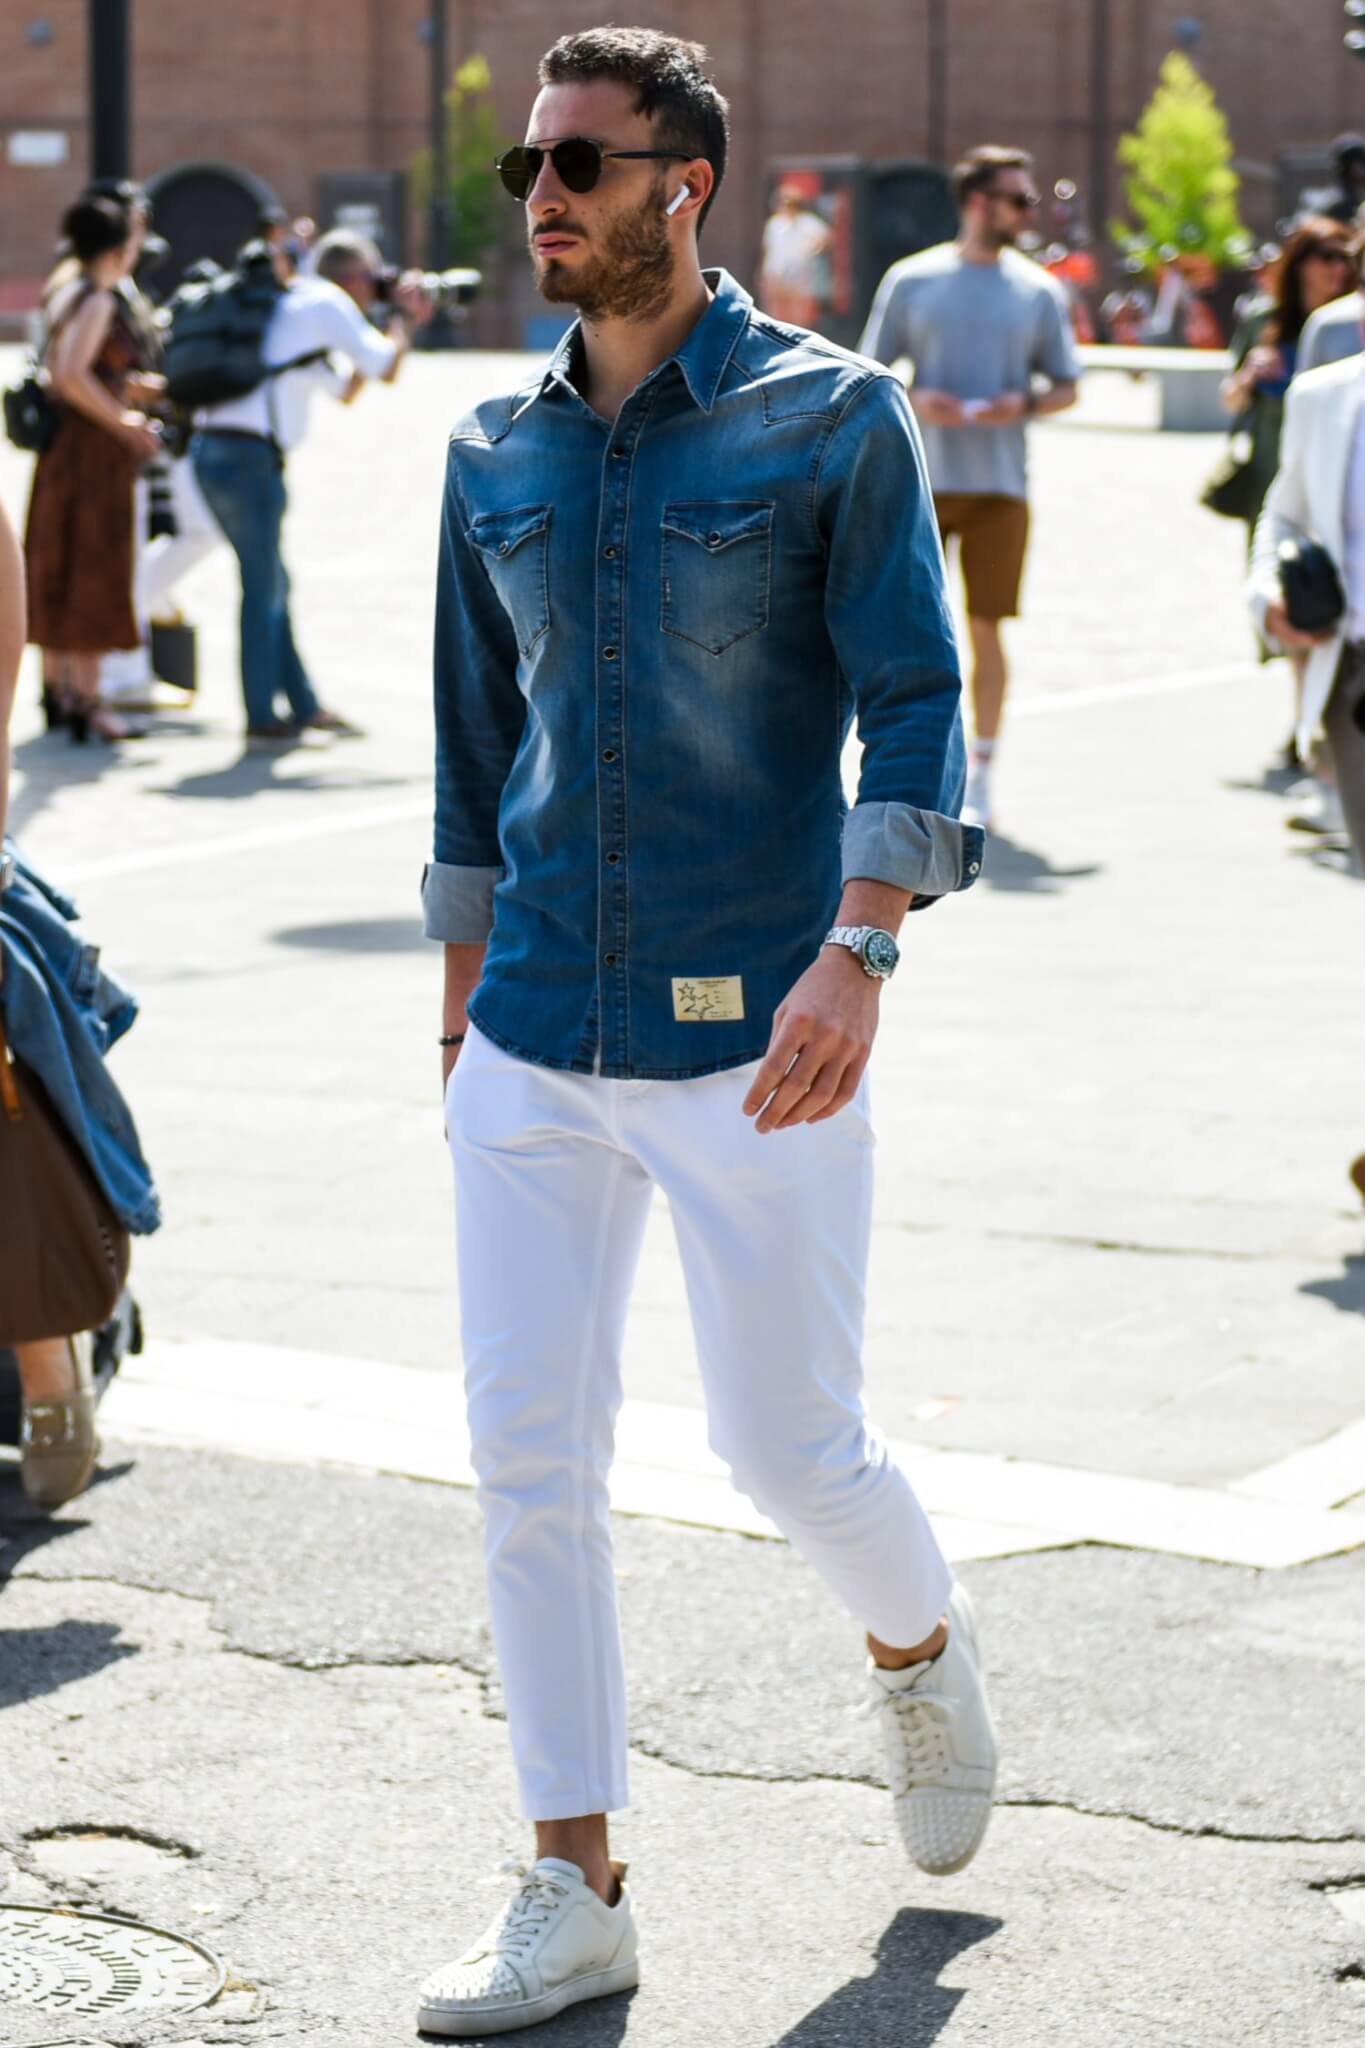 Special feature on denim shirt coordinates! Thorough coverage of each ...